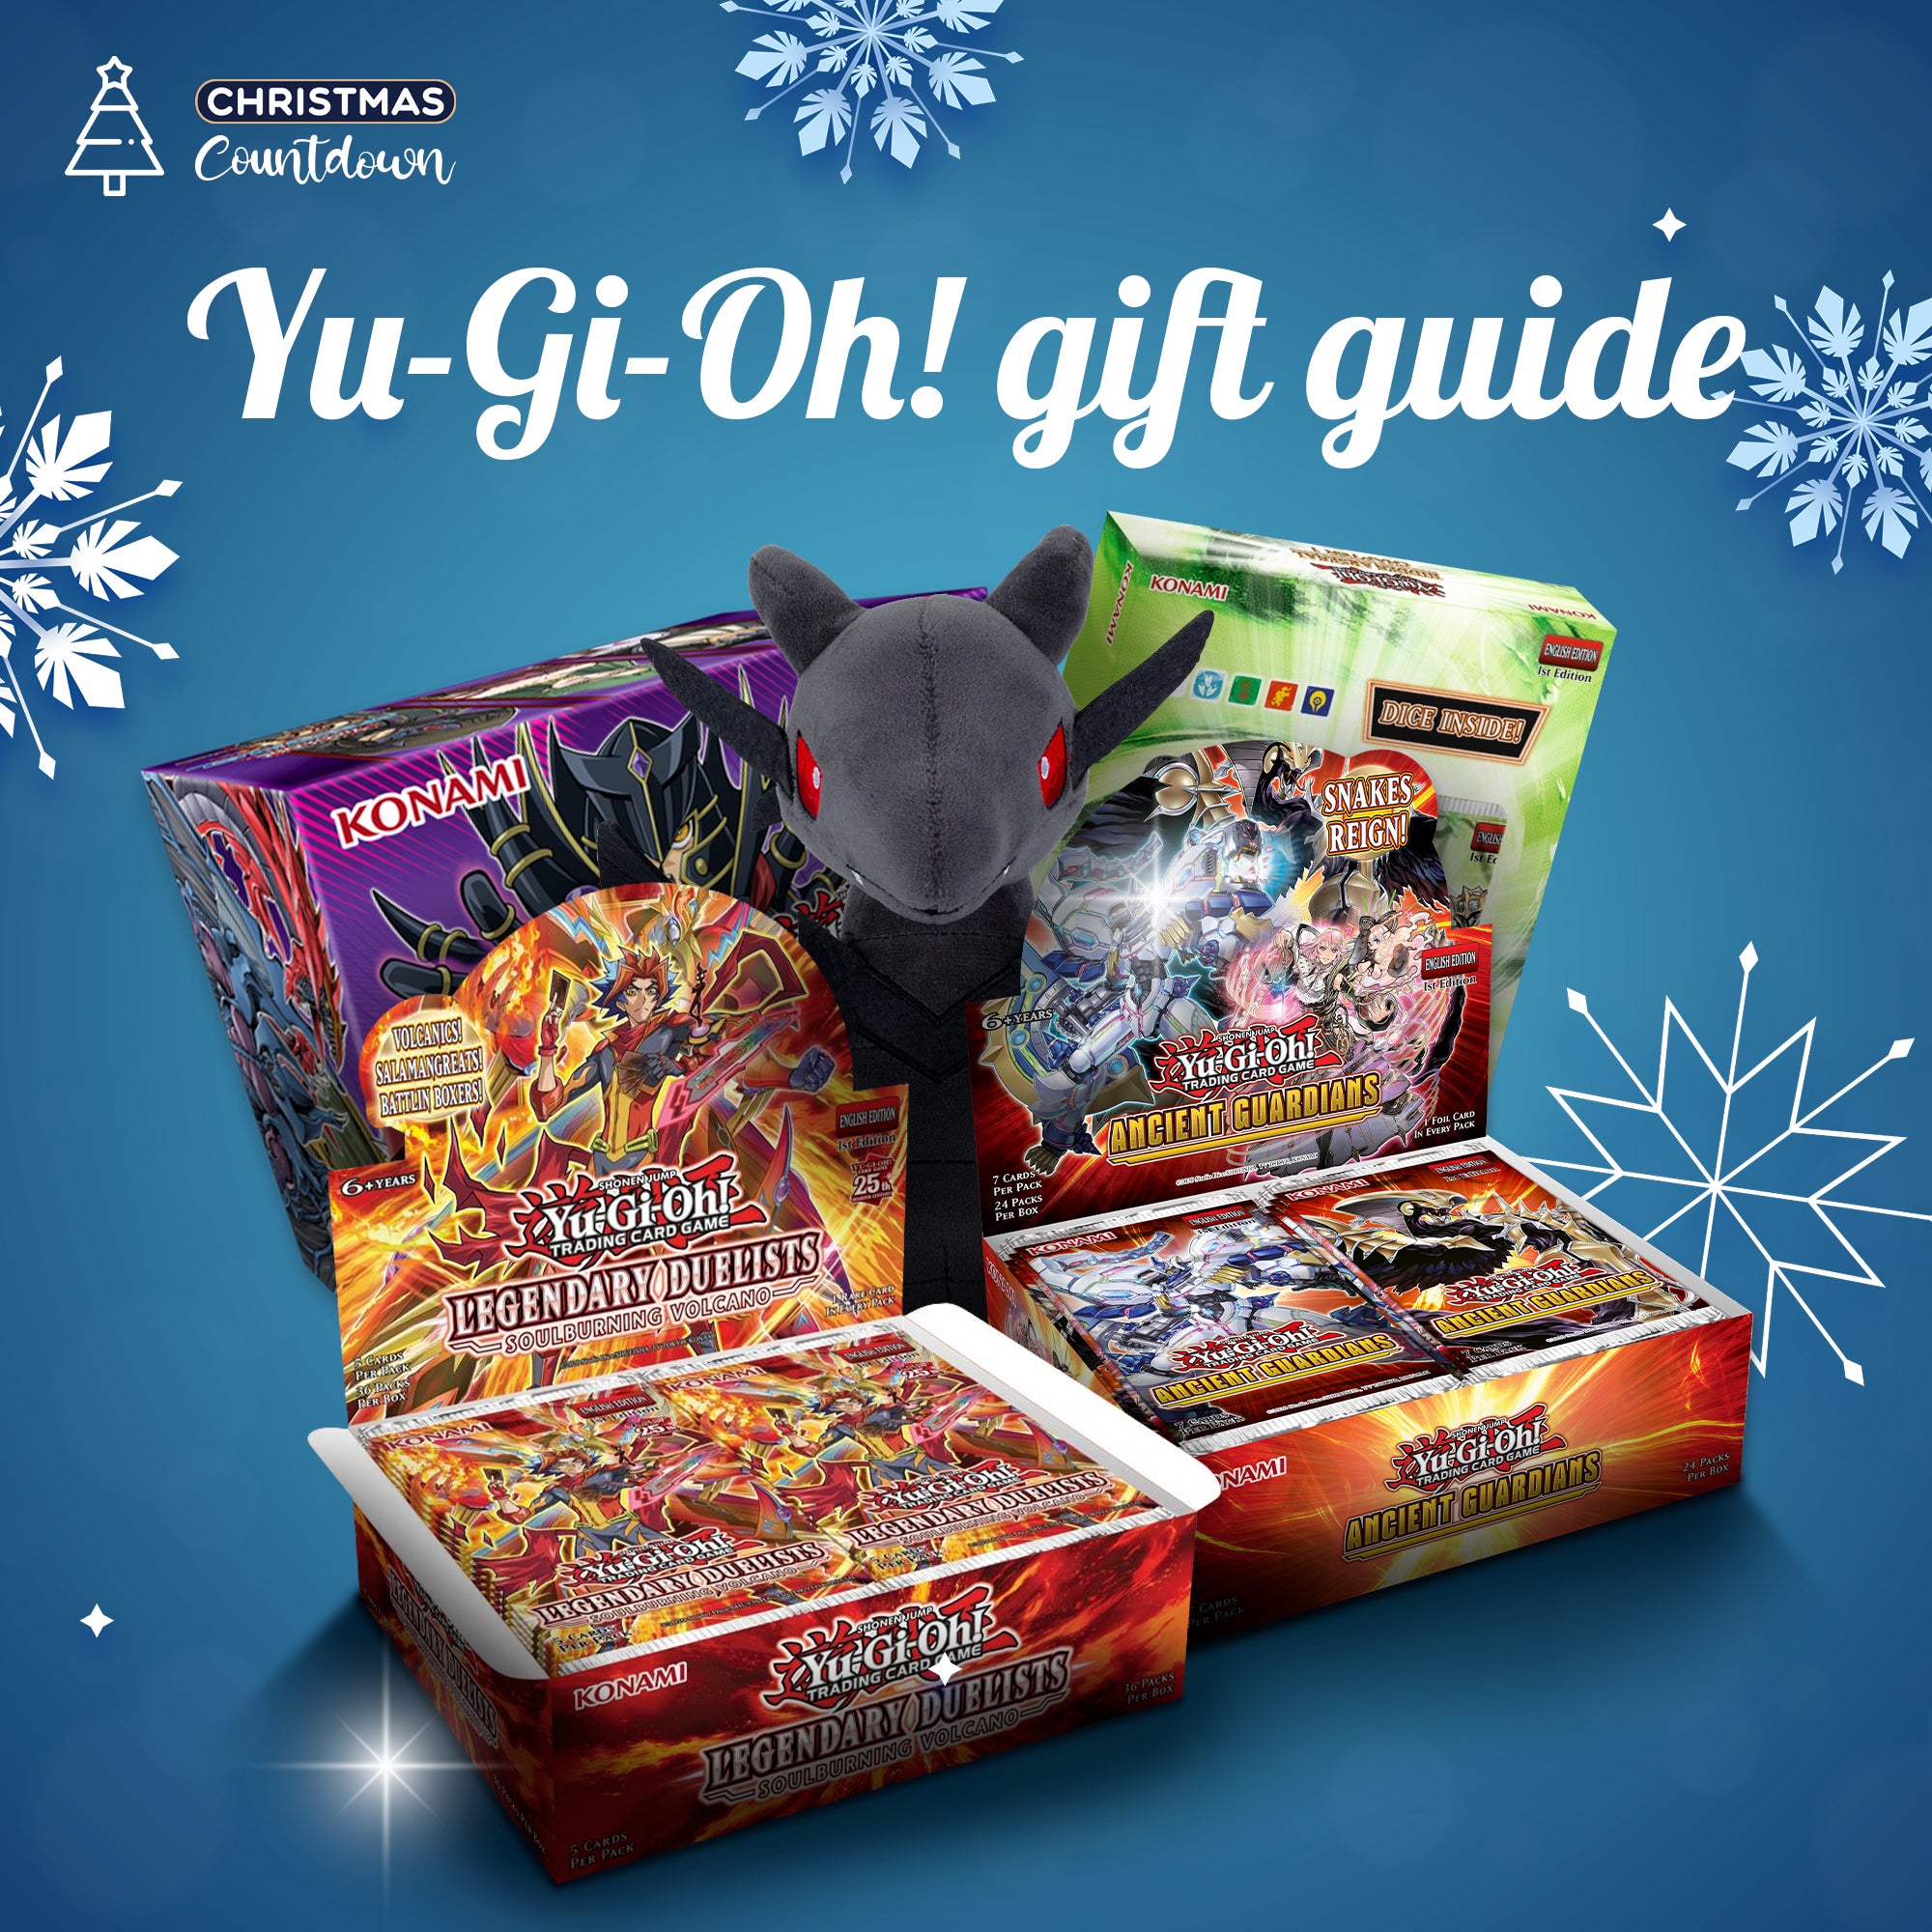 Top Christmas Gifts for Yu-Gi-Oh! players and collectors!